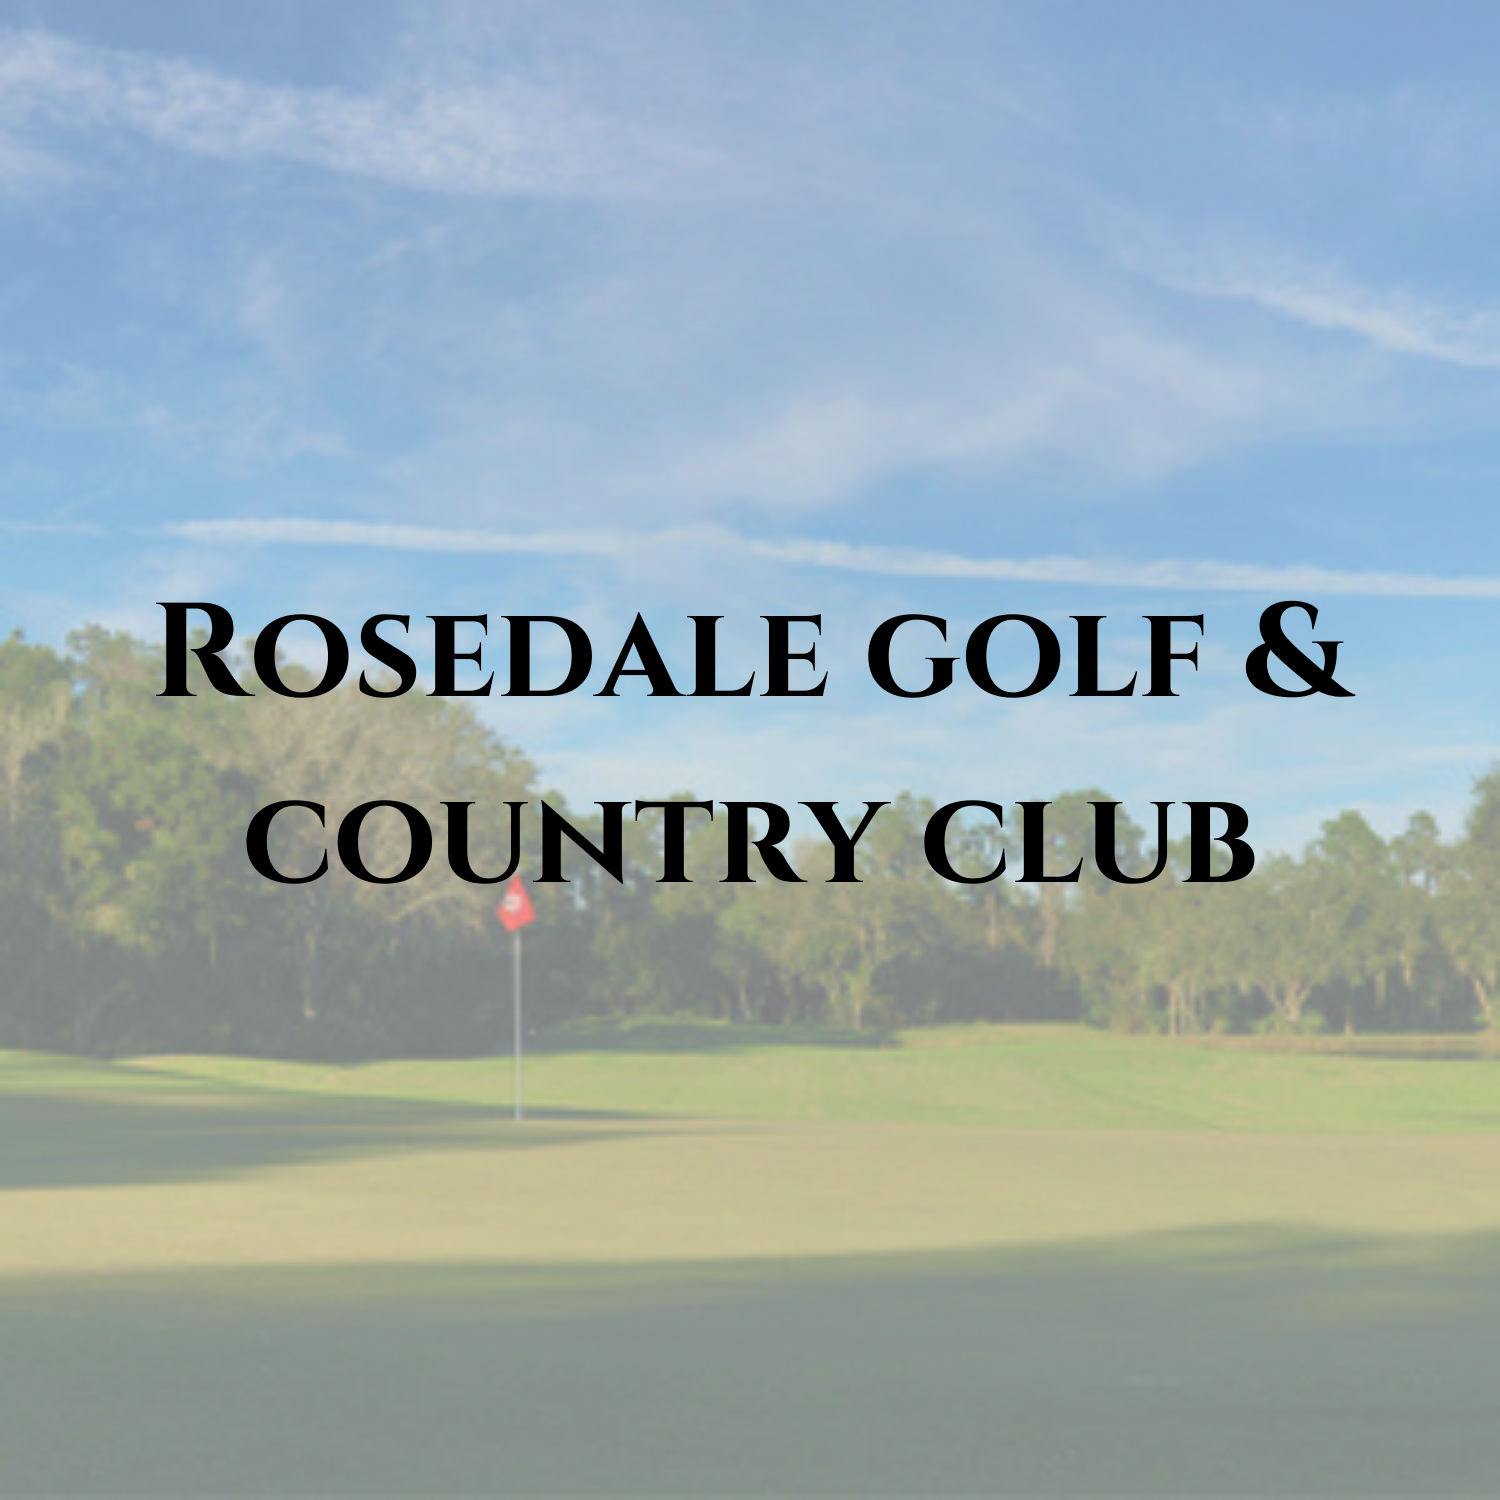 Rosedale Golf & Country Club- 1x1 website button.png